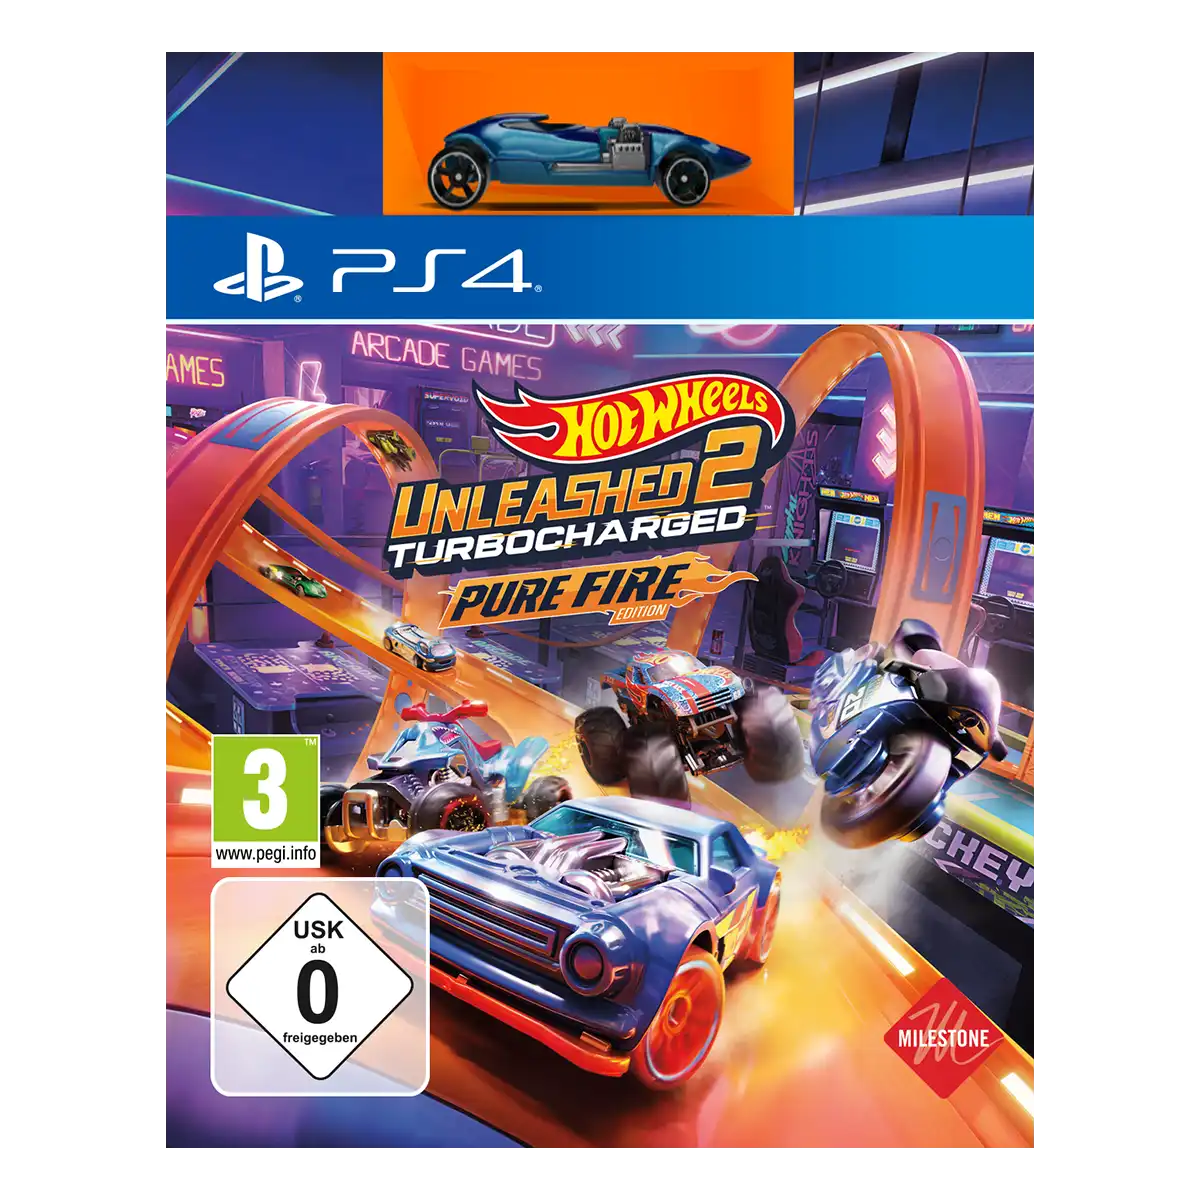 Hot Wheels Unleashed™ 2 Turbocharged Pure Fire Edition (PS4)